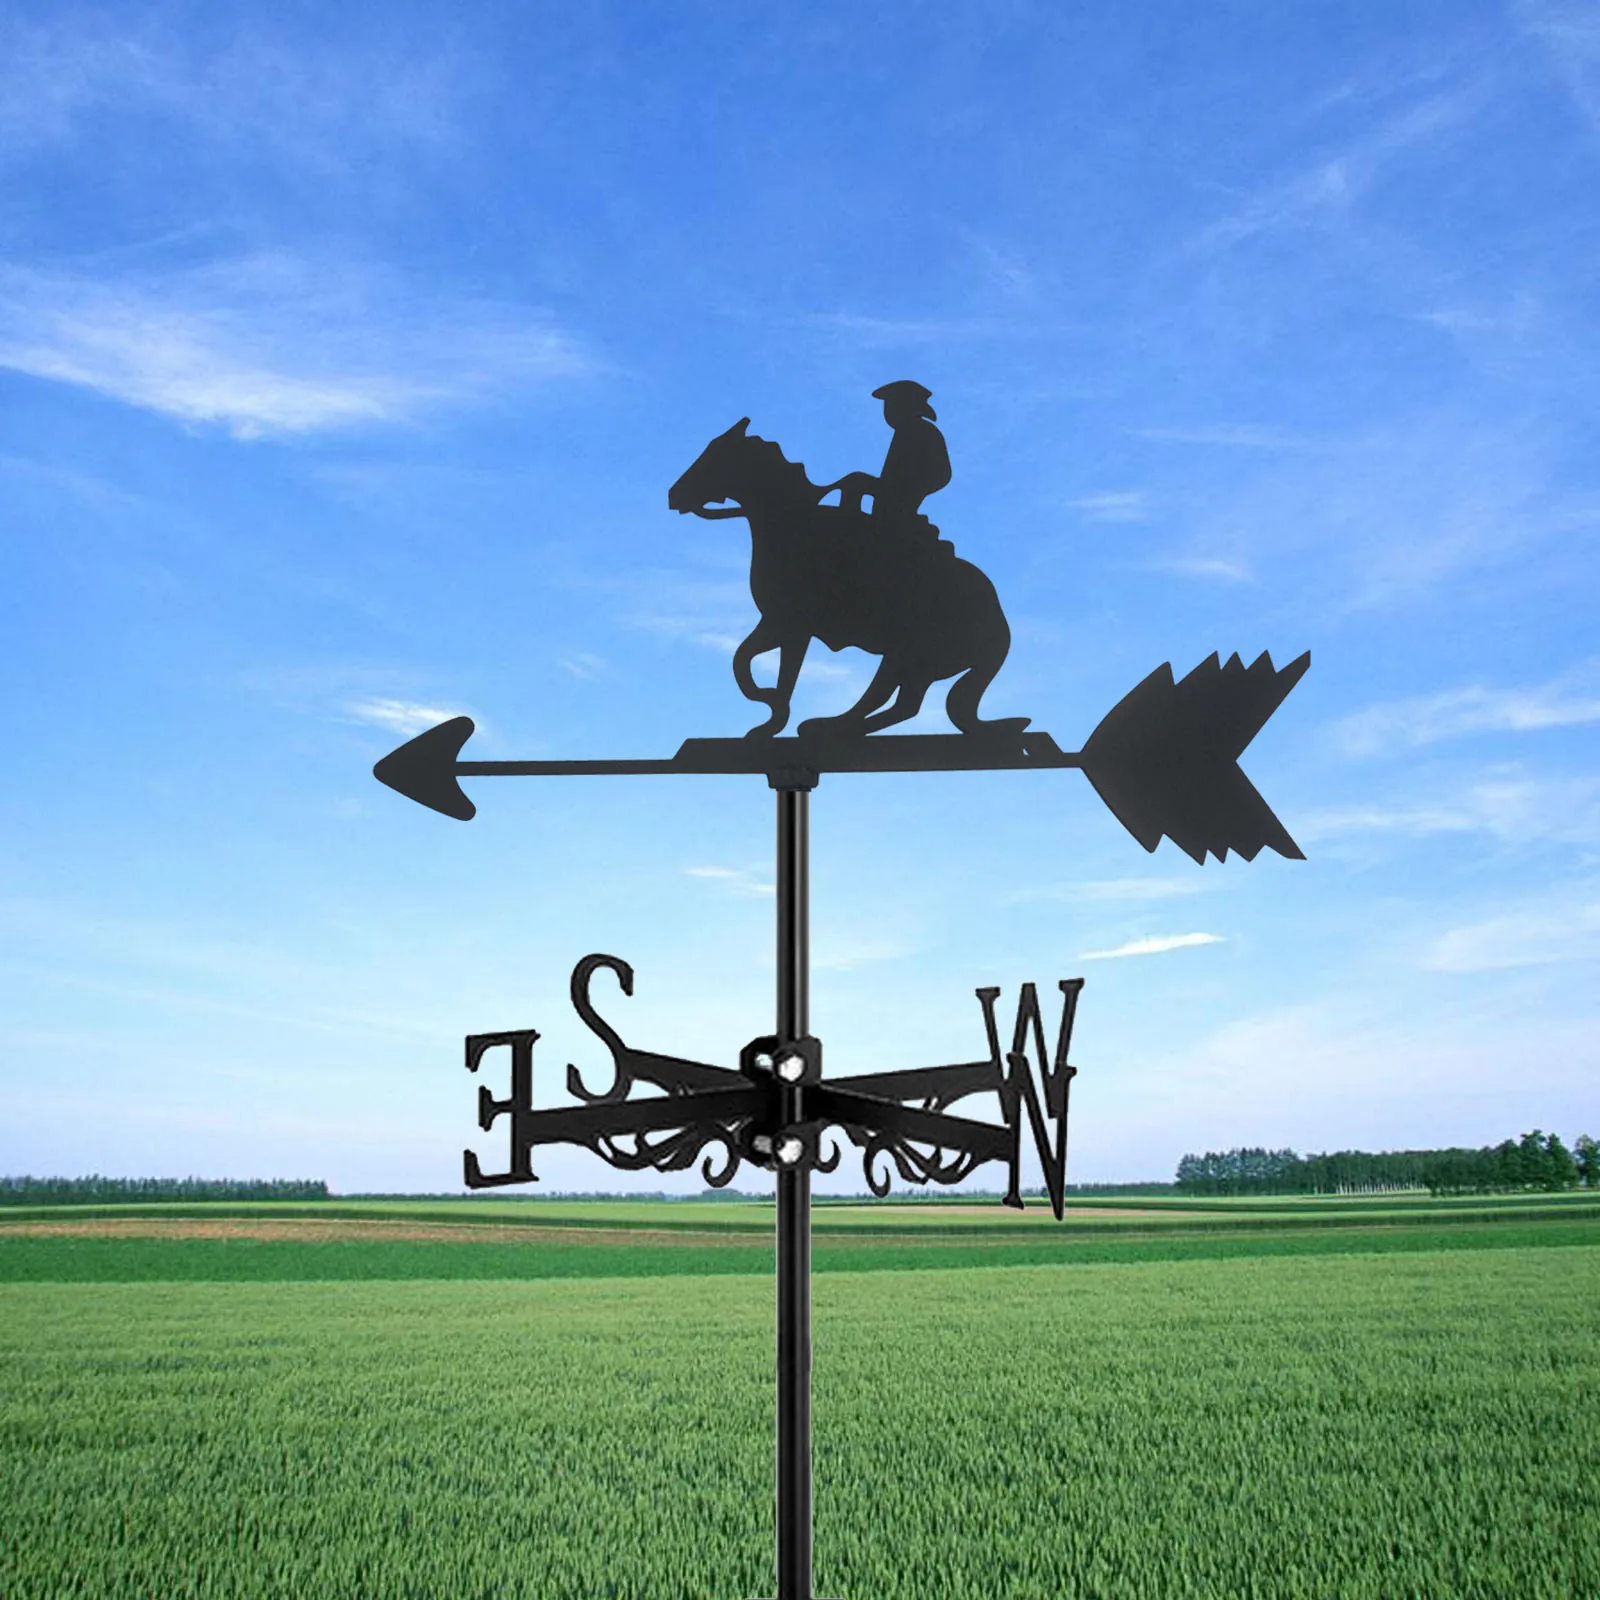 

1 Pc Horse Farm Sign Weathervane Silhouette Art Black Metal Wind Vanes Outdoors Decorations Garden For Roof Yard Building